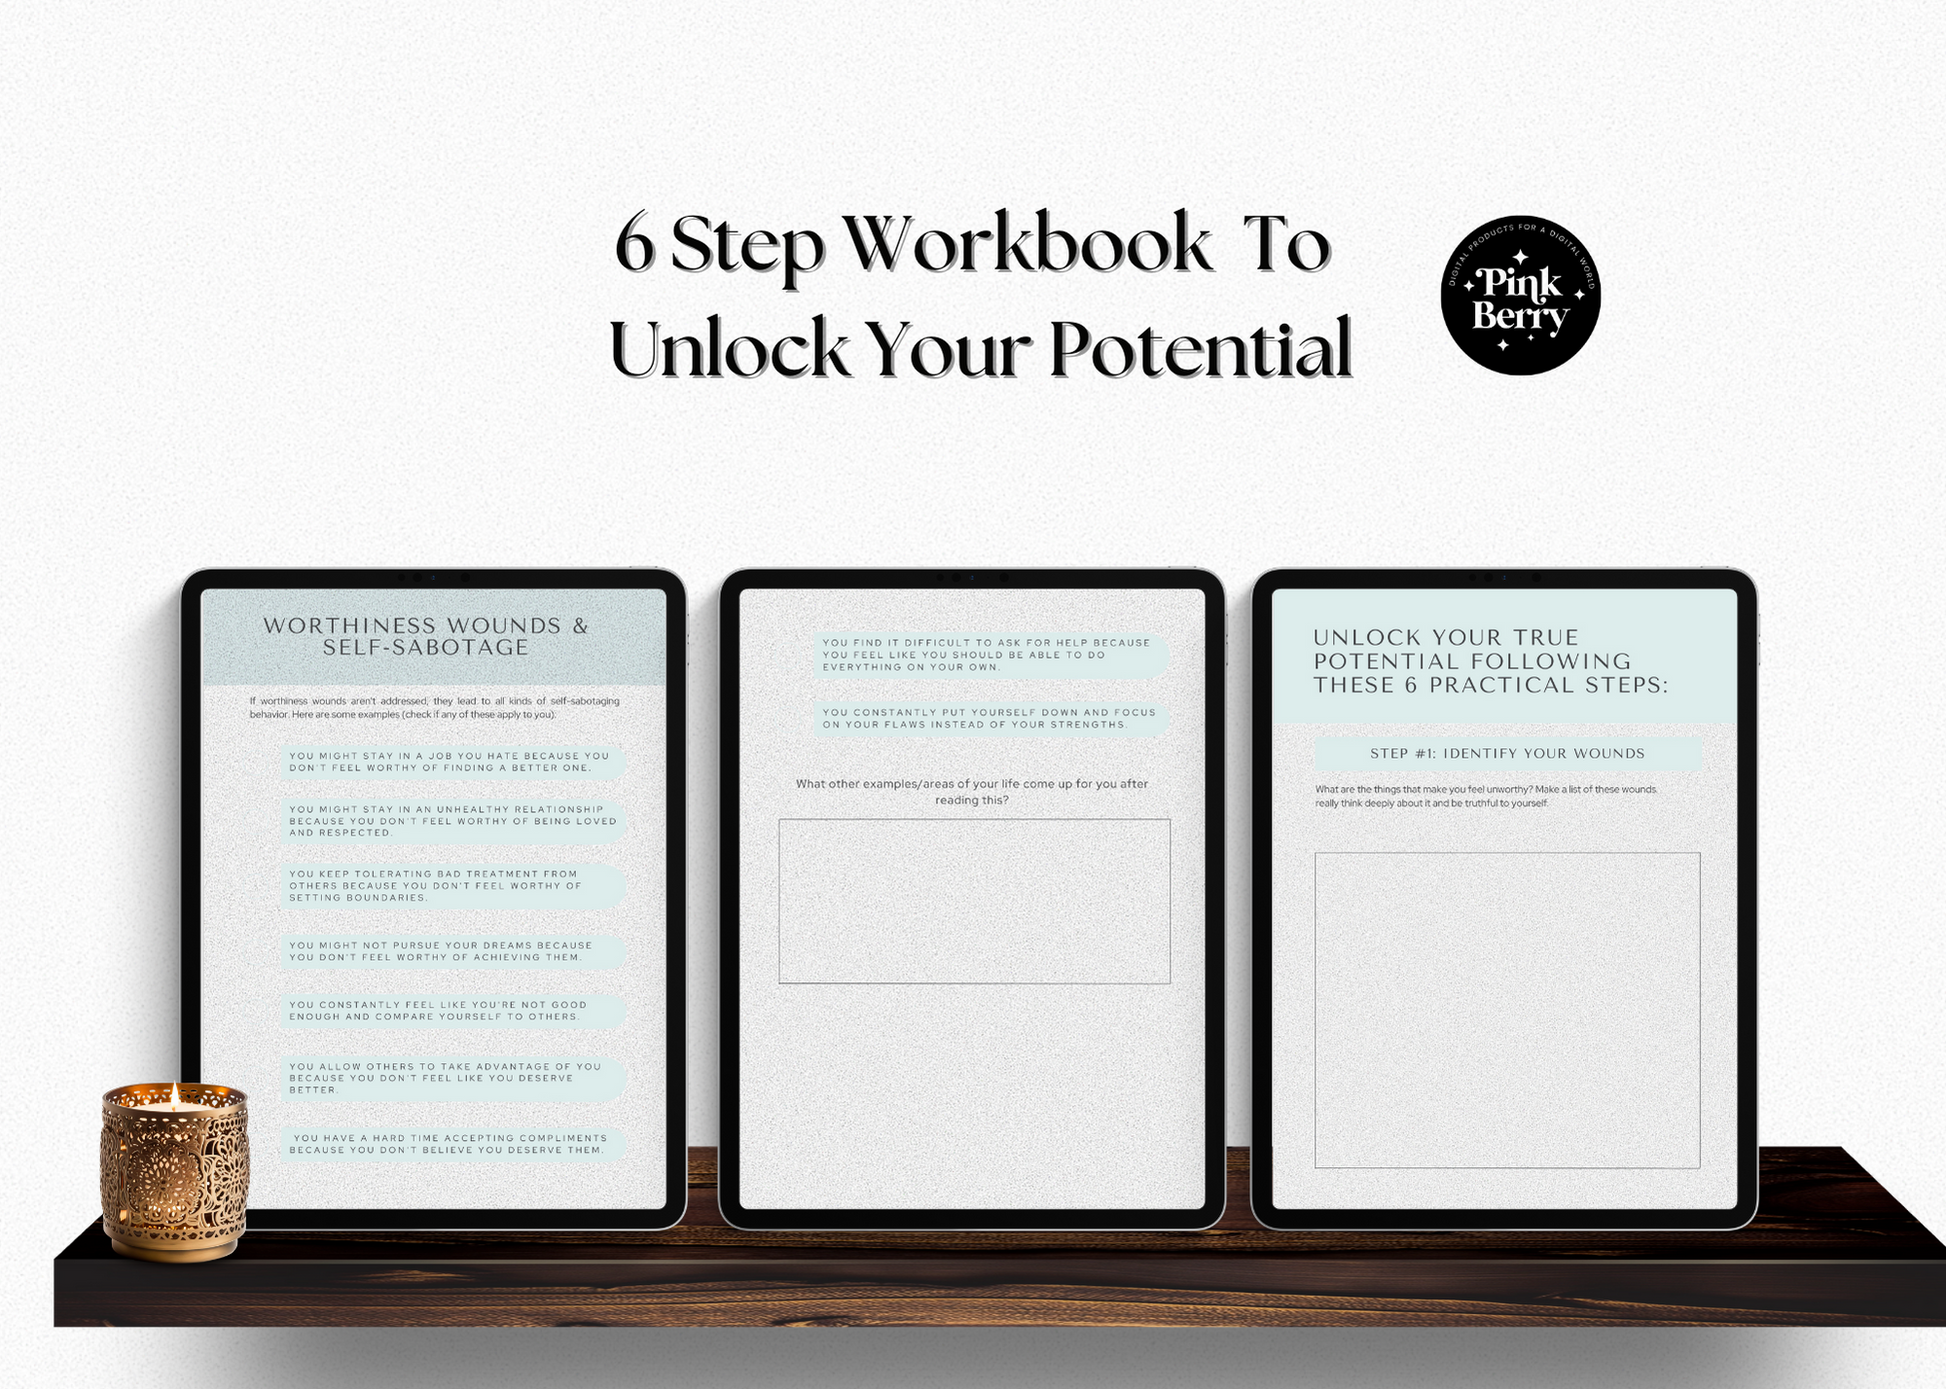 PLR Digital Workbook- Inner Wounds Workbook For Goodnotes-White Labeled Digital Product